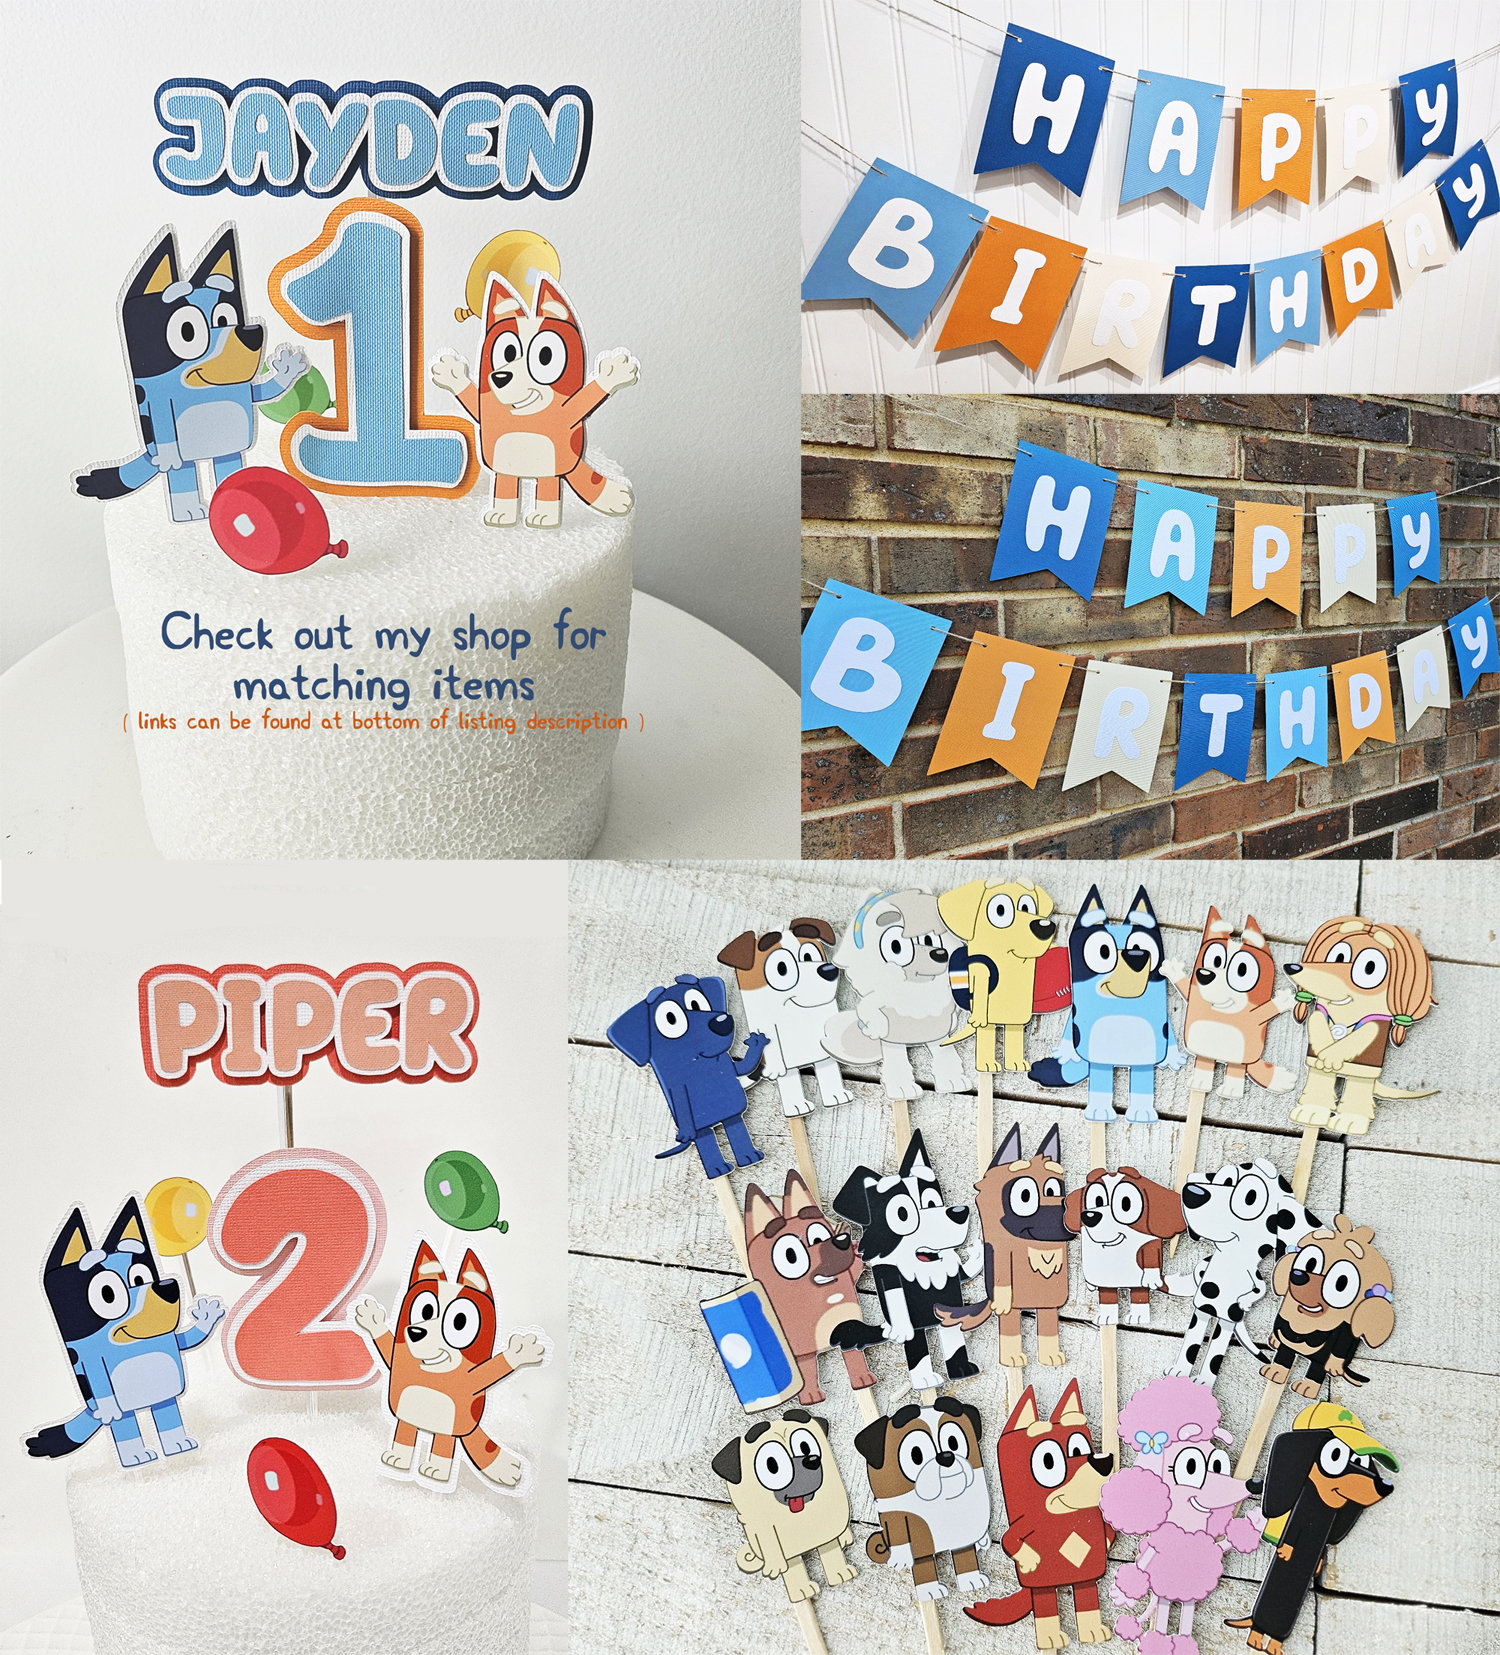 Buy SpecialYou.in Bluey Theme Birthday Decoration Items for Baby